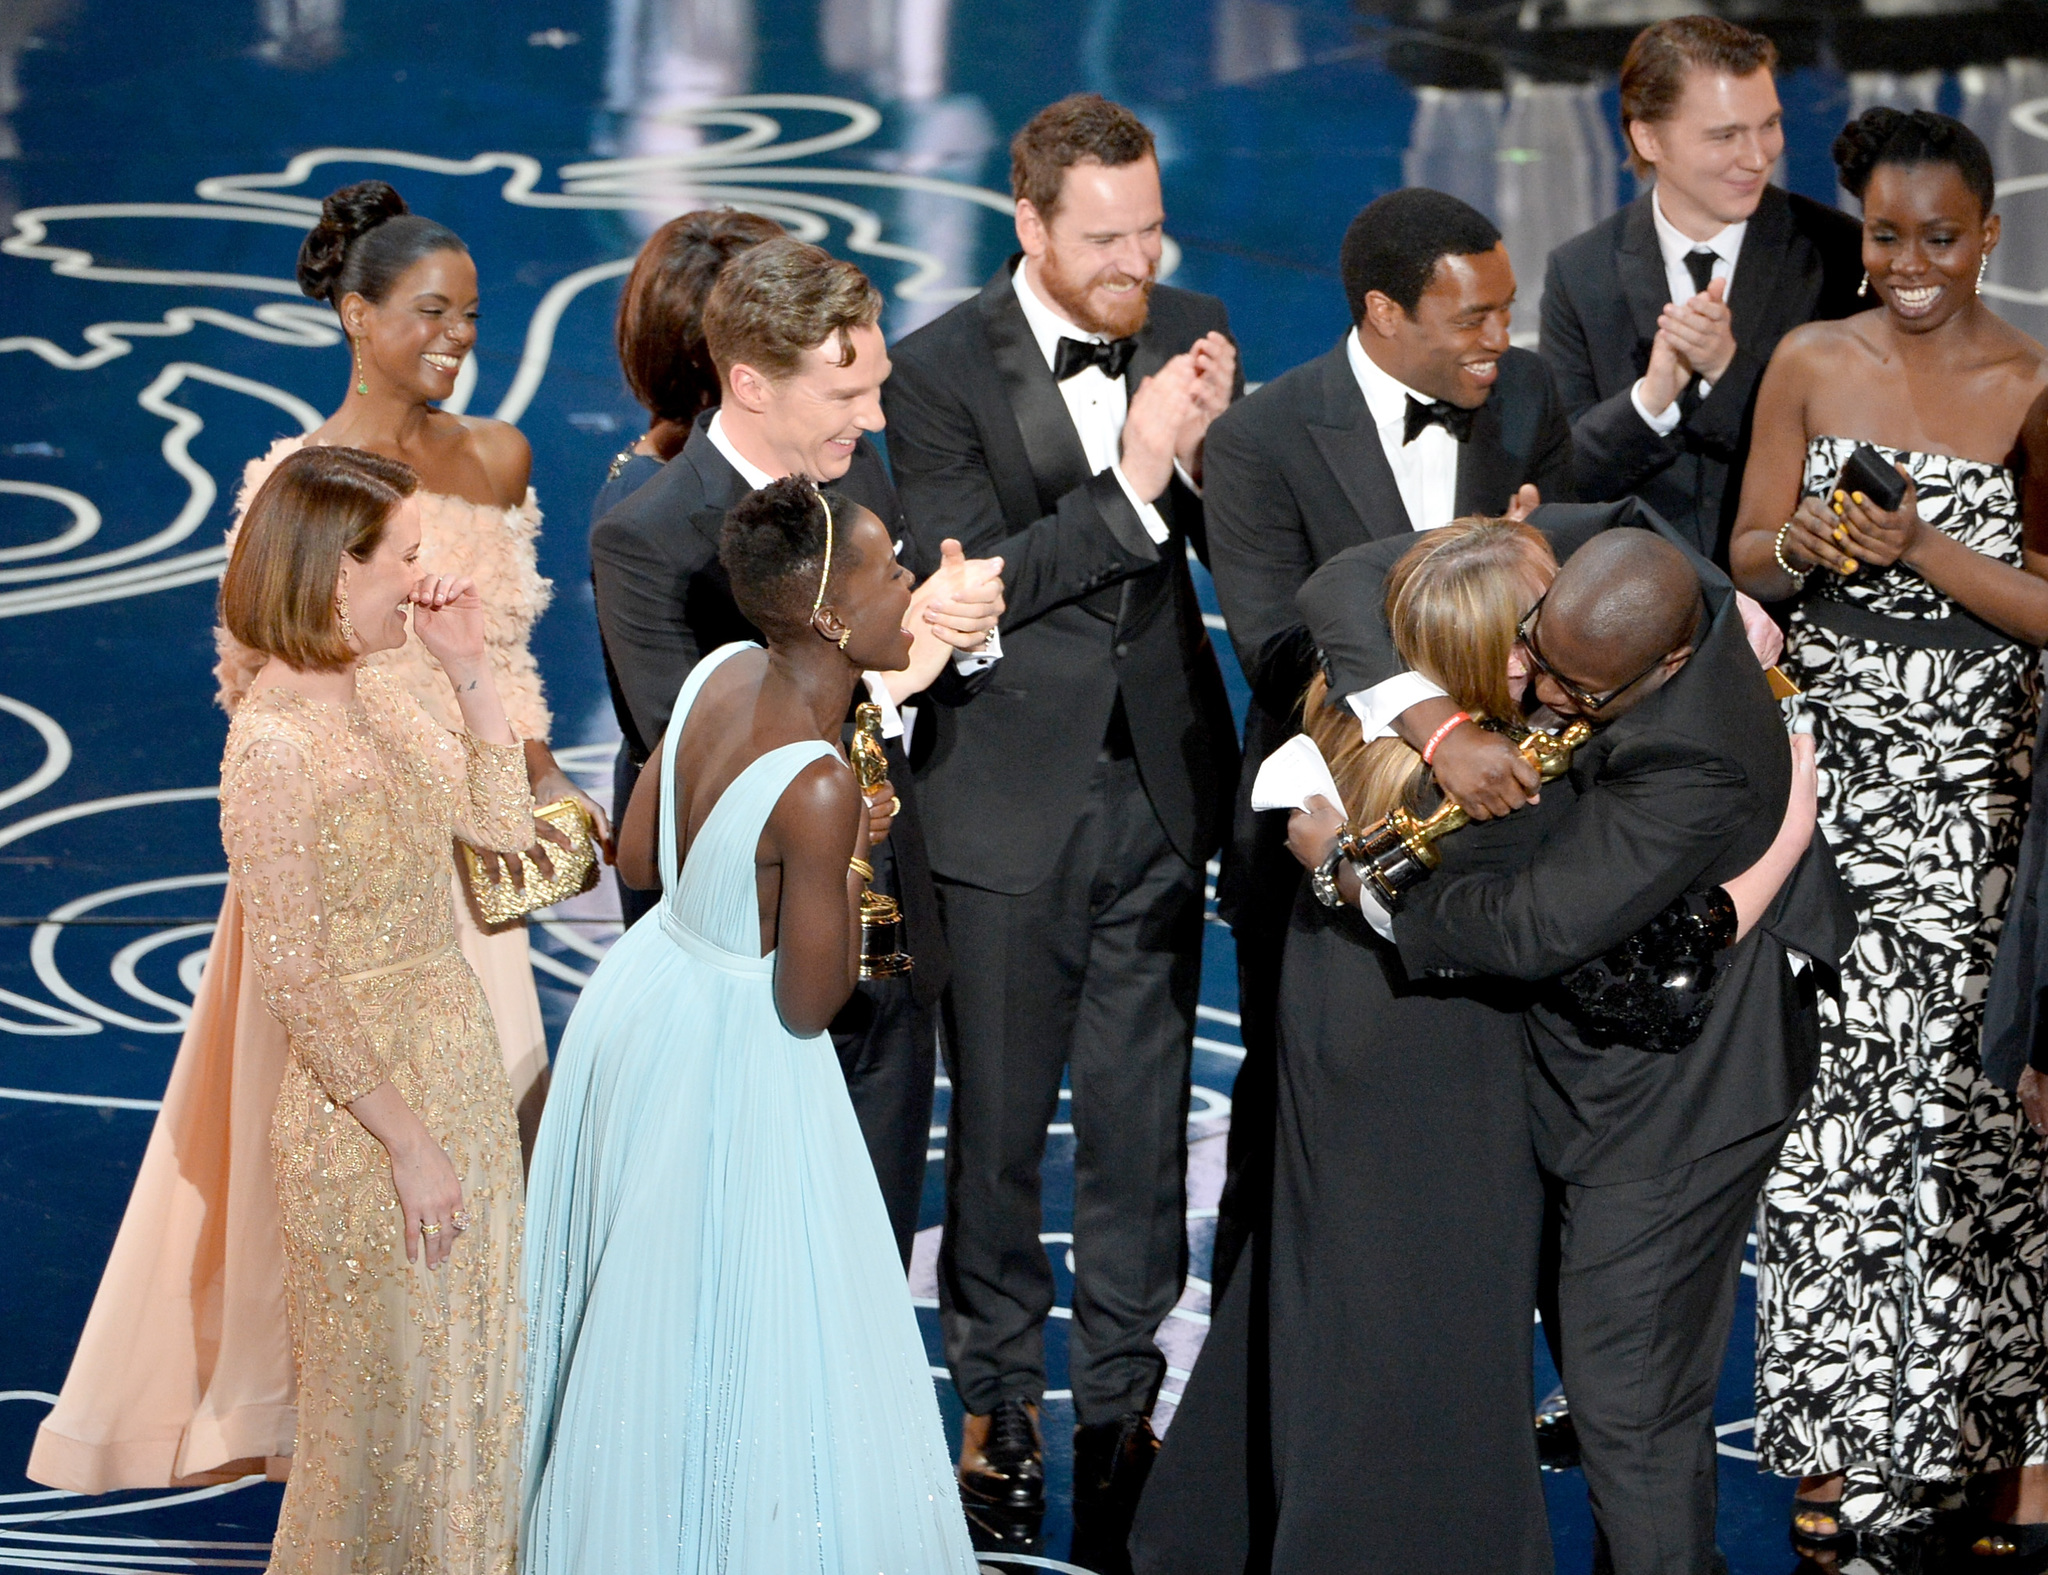 Sarah Paulson, Paul Dano, Chiwetel Ejiofor, Kelsey Scott, Michael Fassbender, Benedict Cumberbatch, Adepero Oduye, Lupita Nyong'o, Steve McQueen and Bianca Stigter at event of The Oscars (2014)